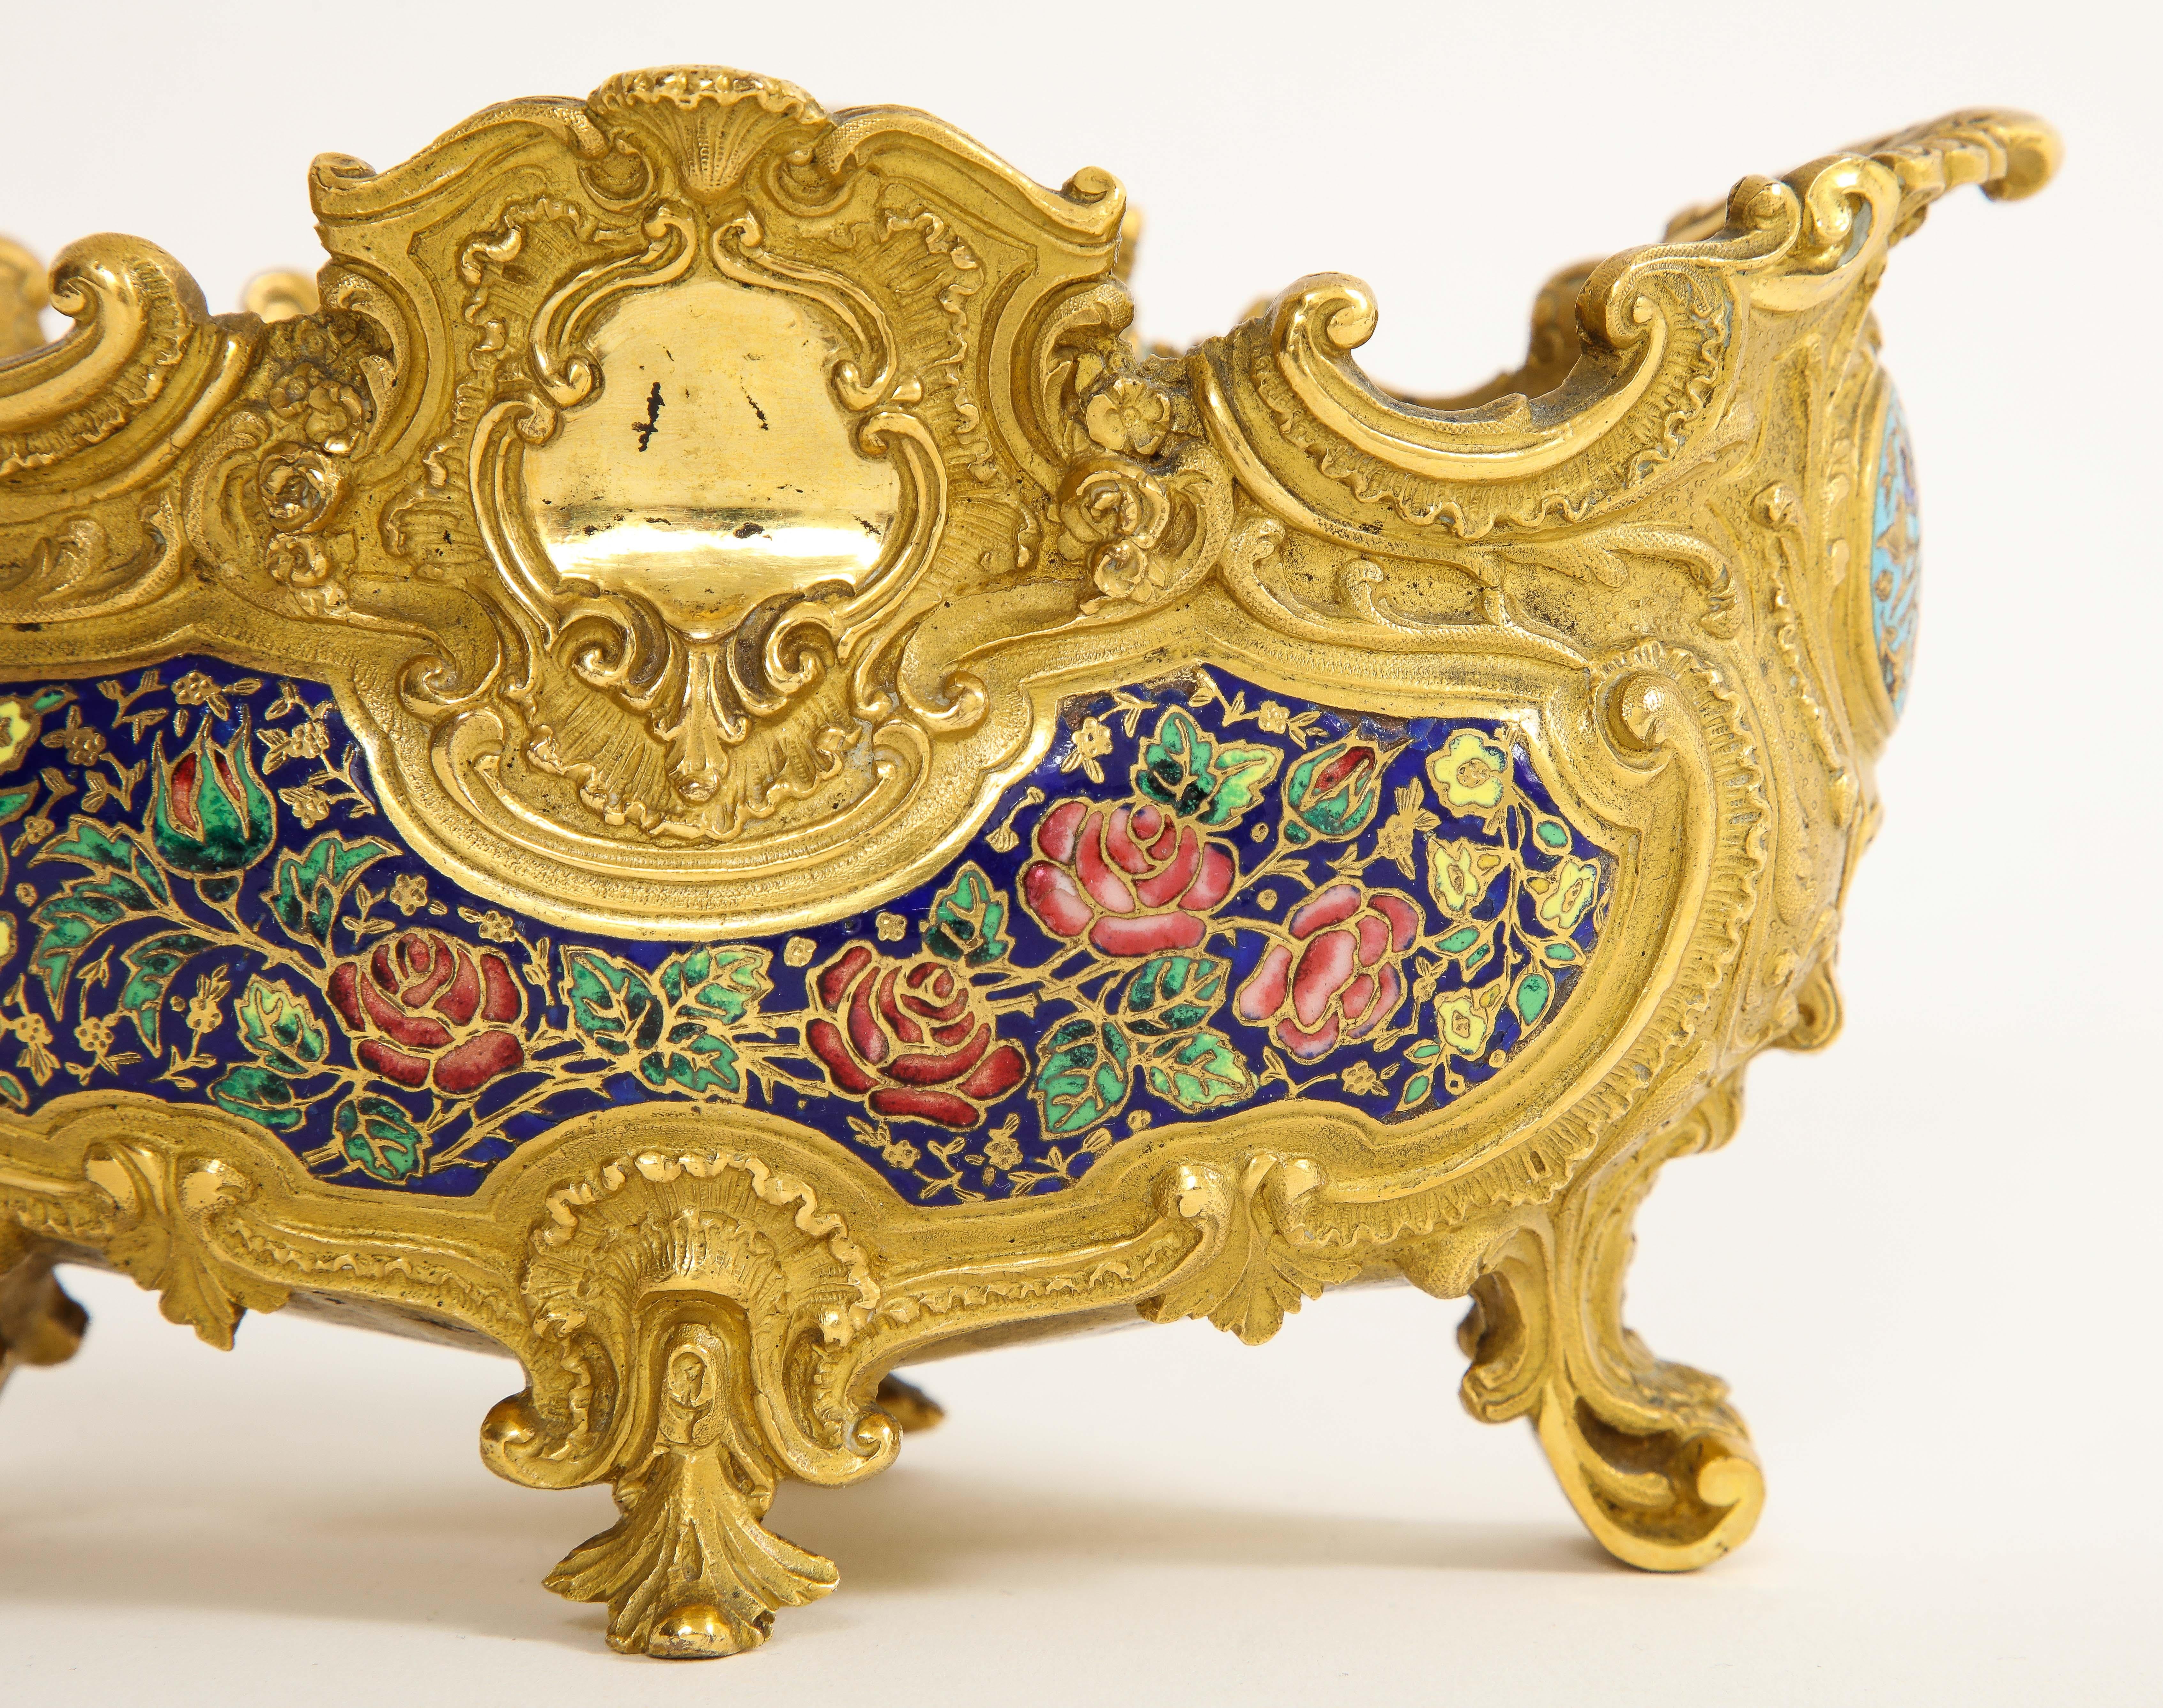 A 19th C. French Ormolu Champlevé Enamel Footed Centerpiece, Att. Barbedienne For Sale 2